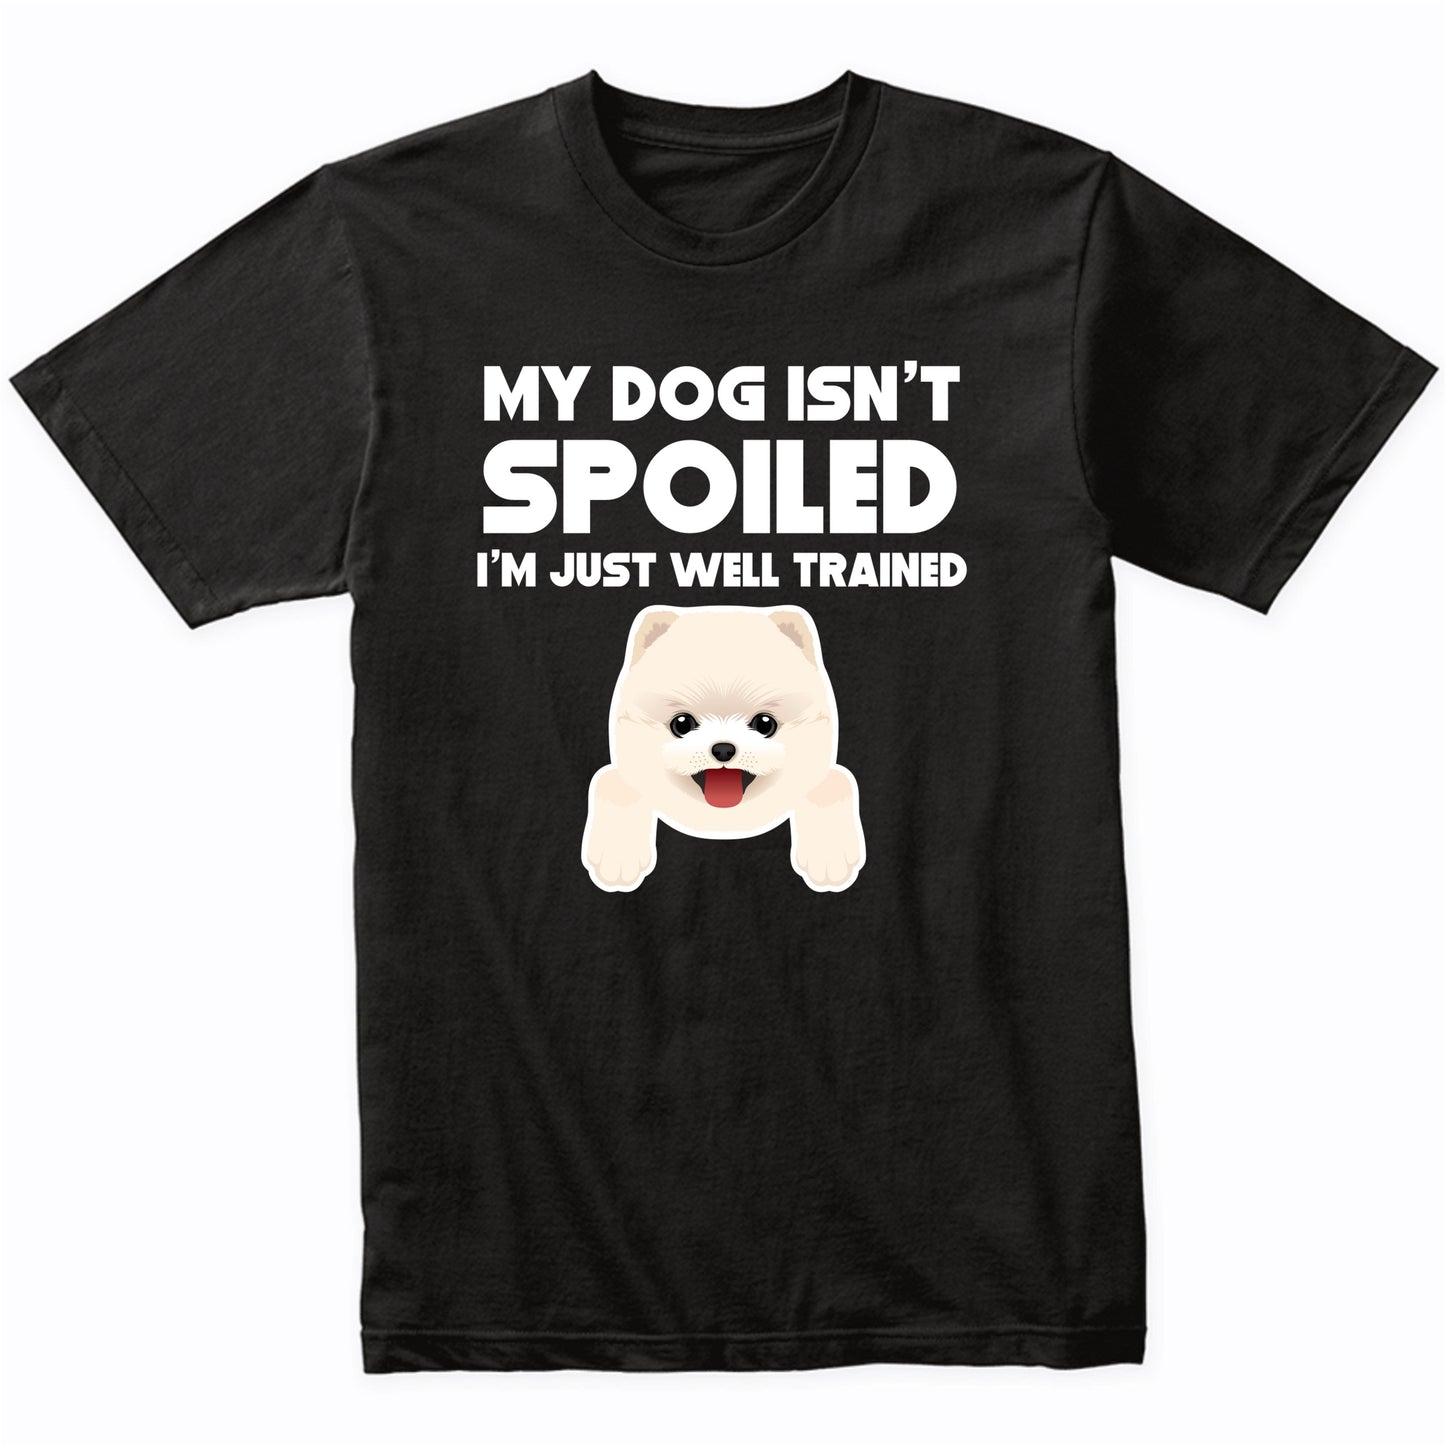 My Dog Isn't Spoiled I'm Just Well Trained Funny Pomeranian T-Shirt